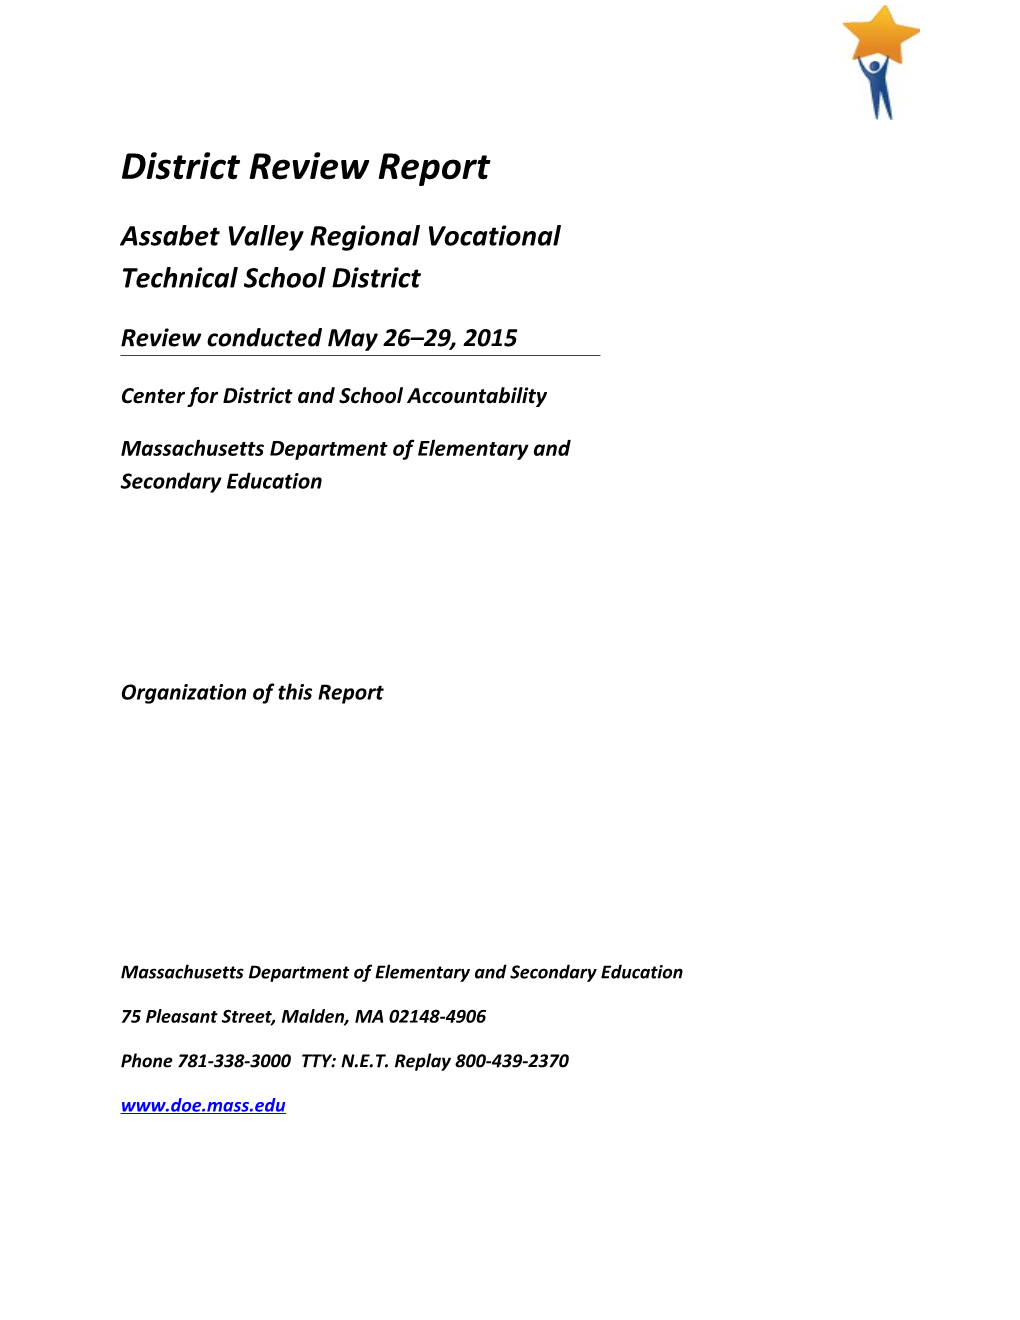 Assabet Valley District Review Report, 2015 Onsite